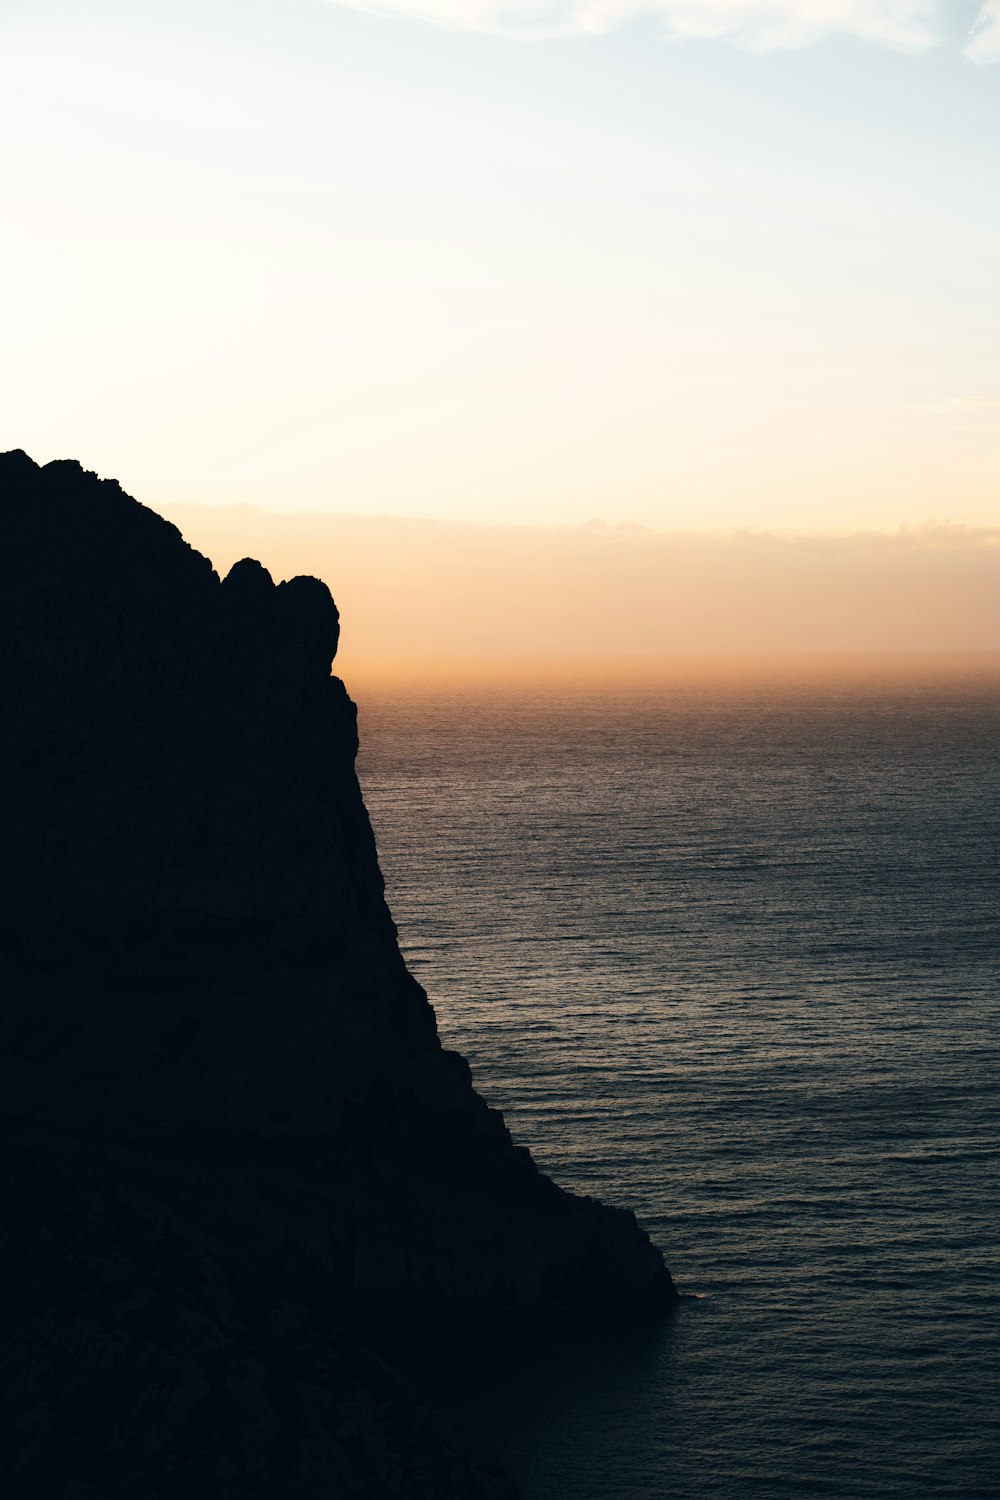 a person standing on top of a mountain next to the ocean